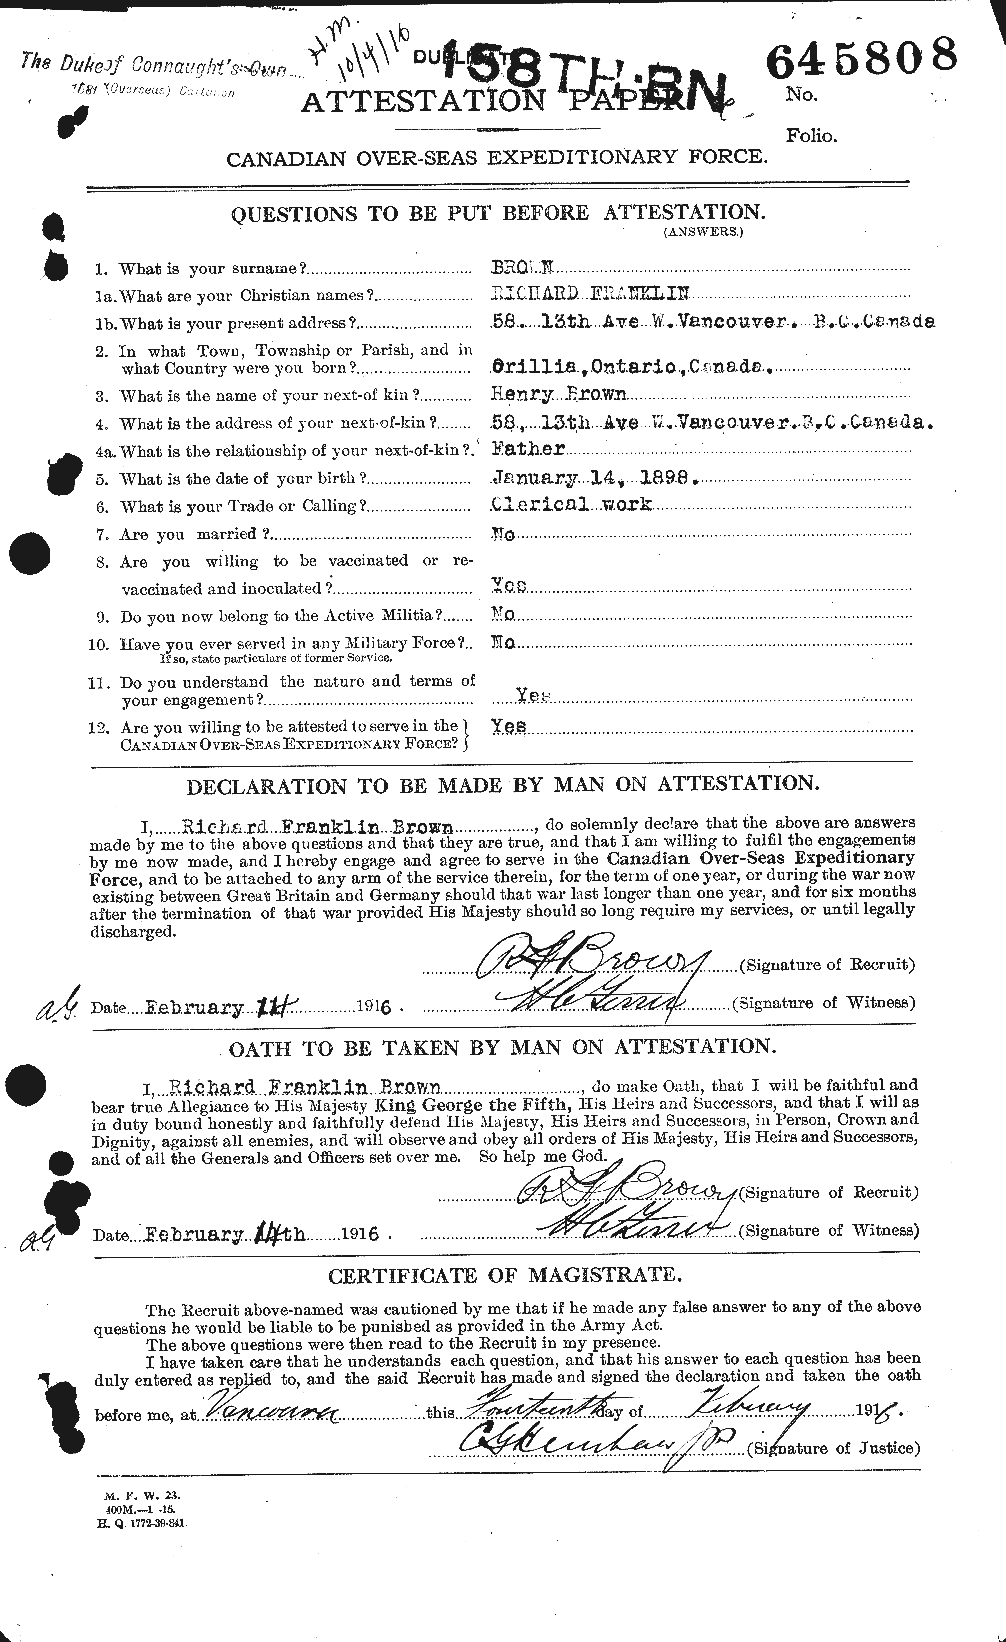 Personnel Records of the First World War - CEF 267269a